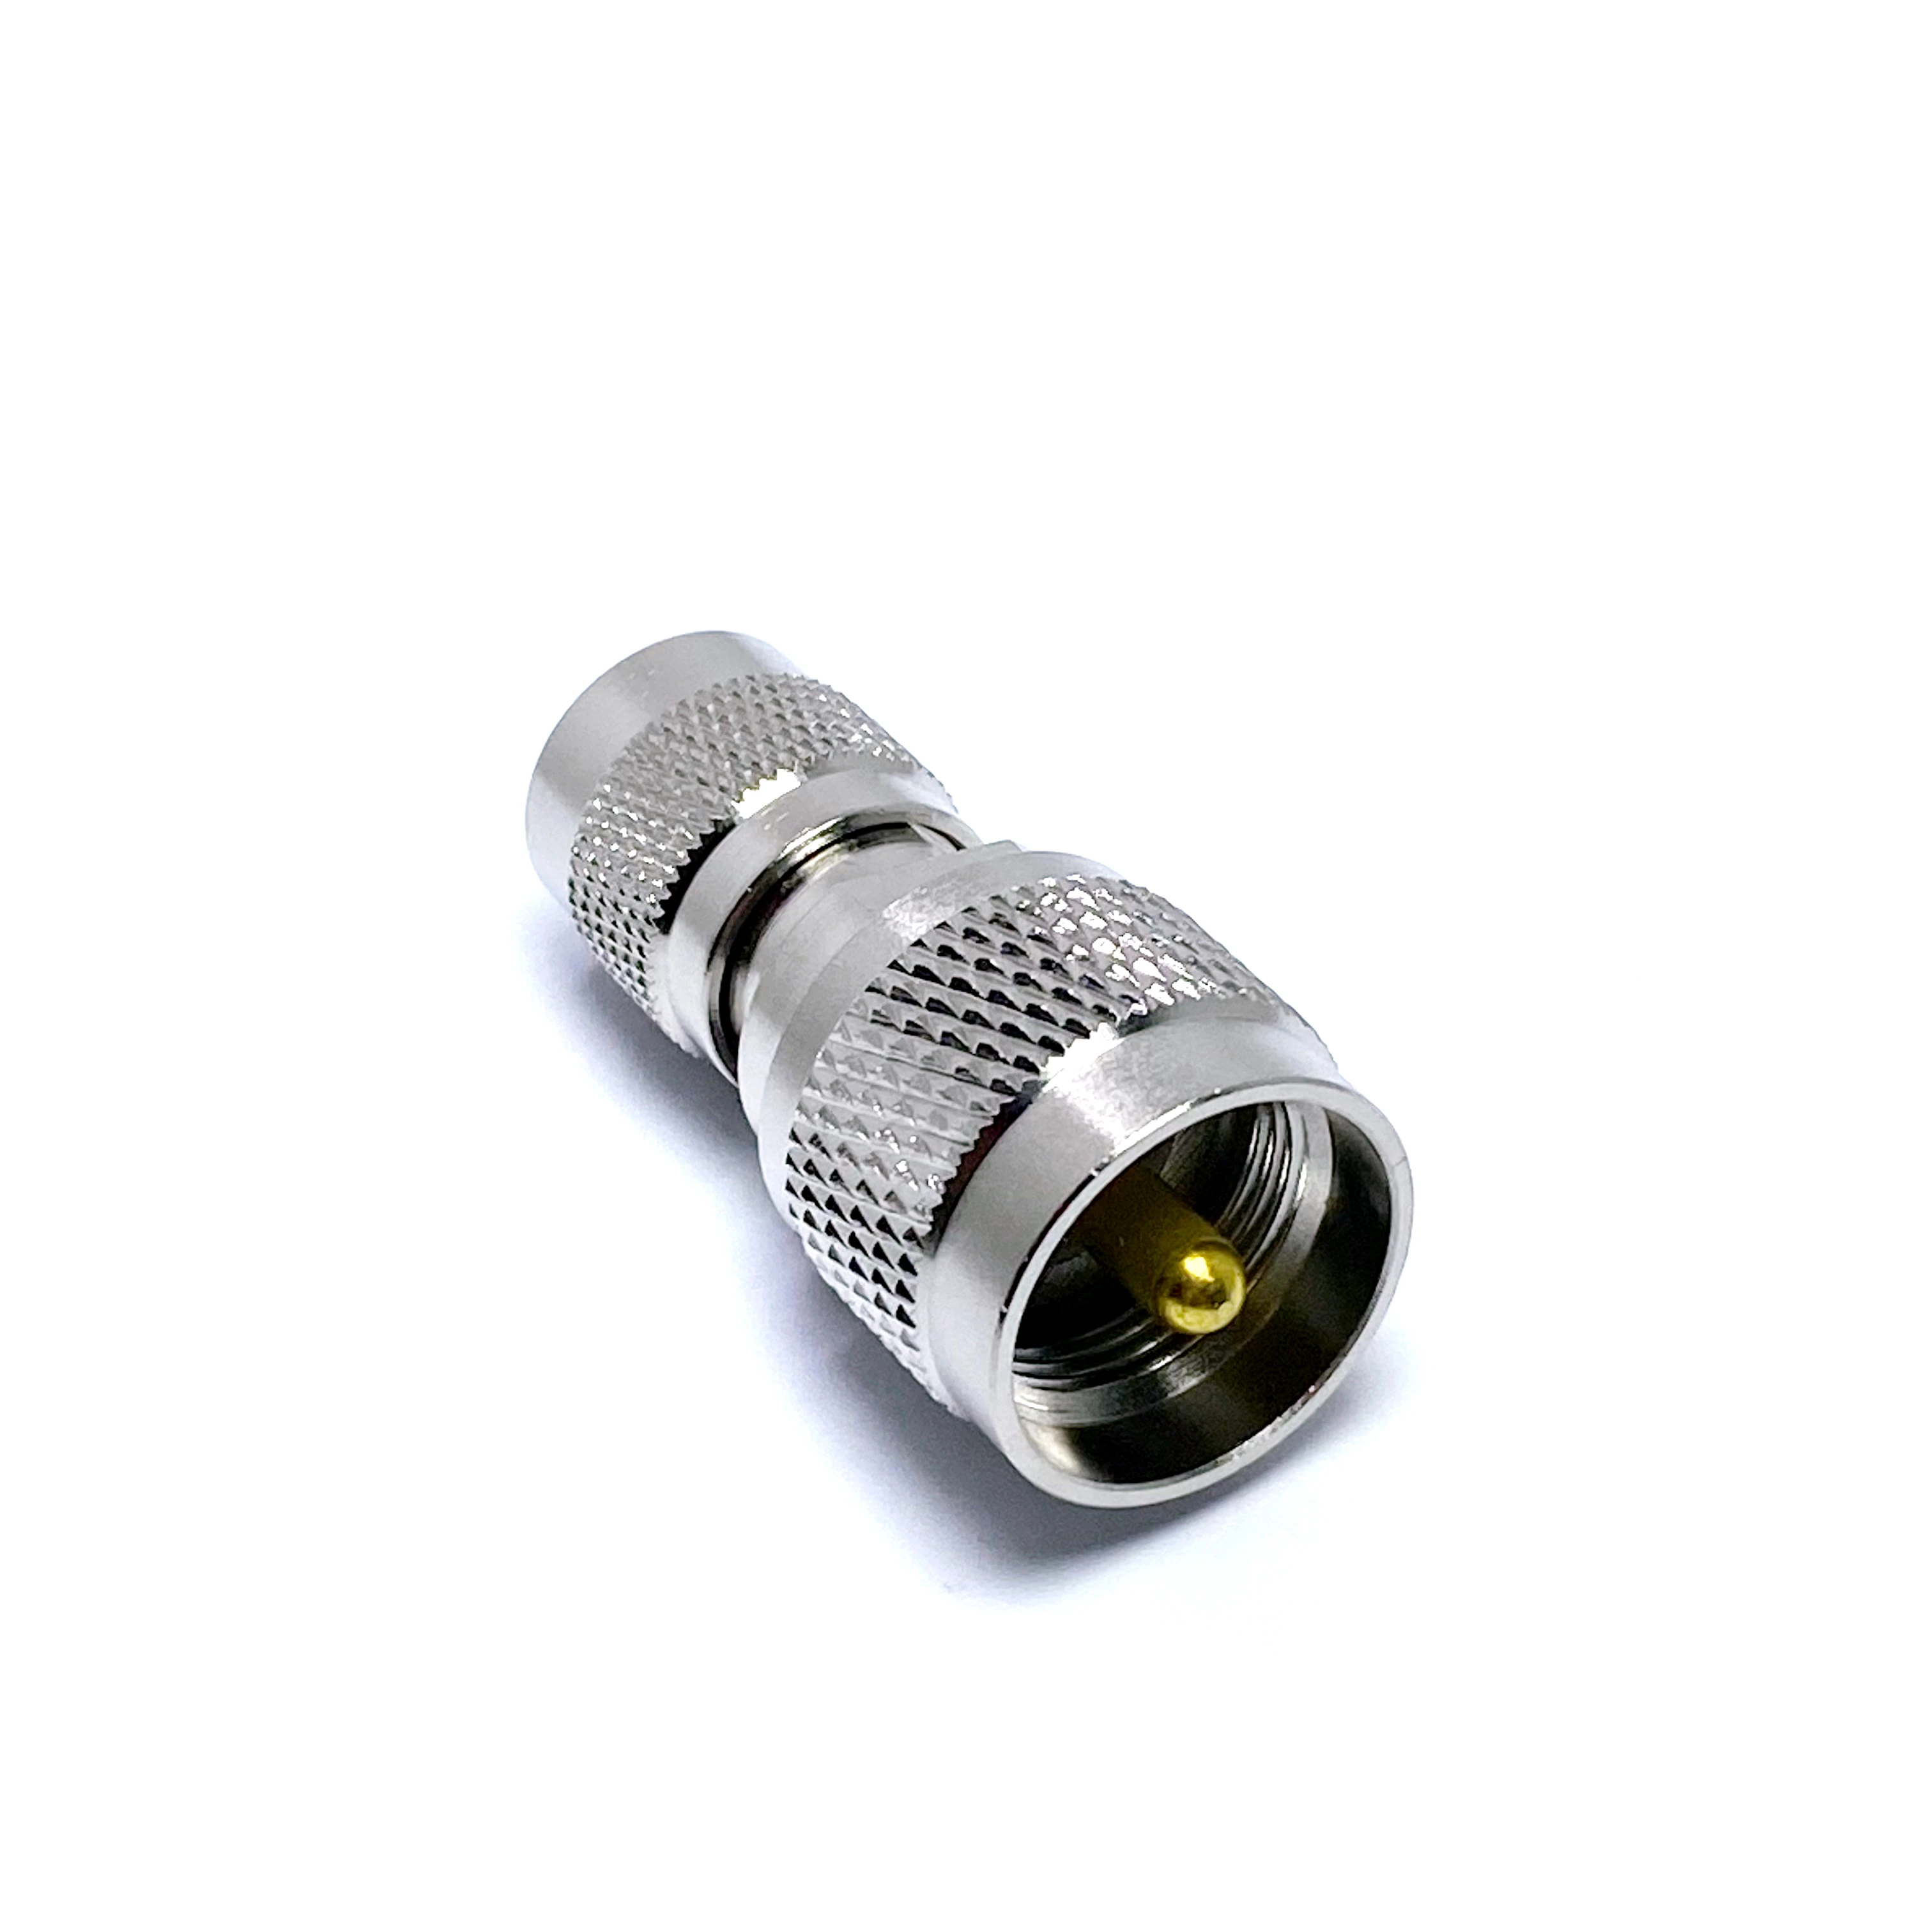 Wholesale rf connector adapter Uhf PL259 male to tnc male plug coax converter supplier